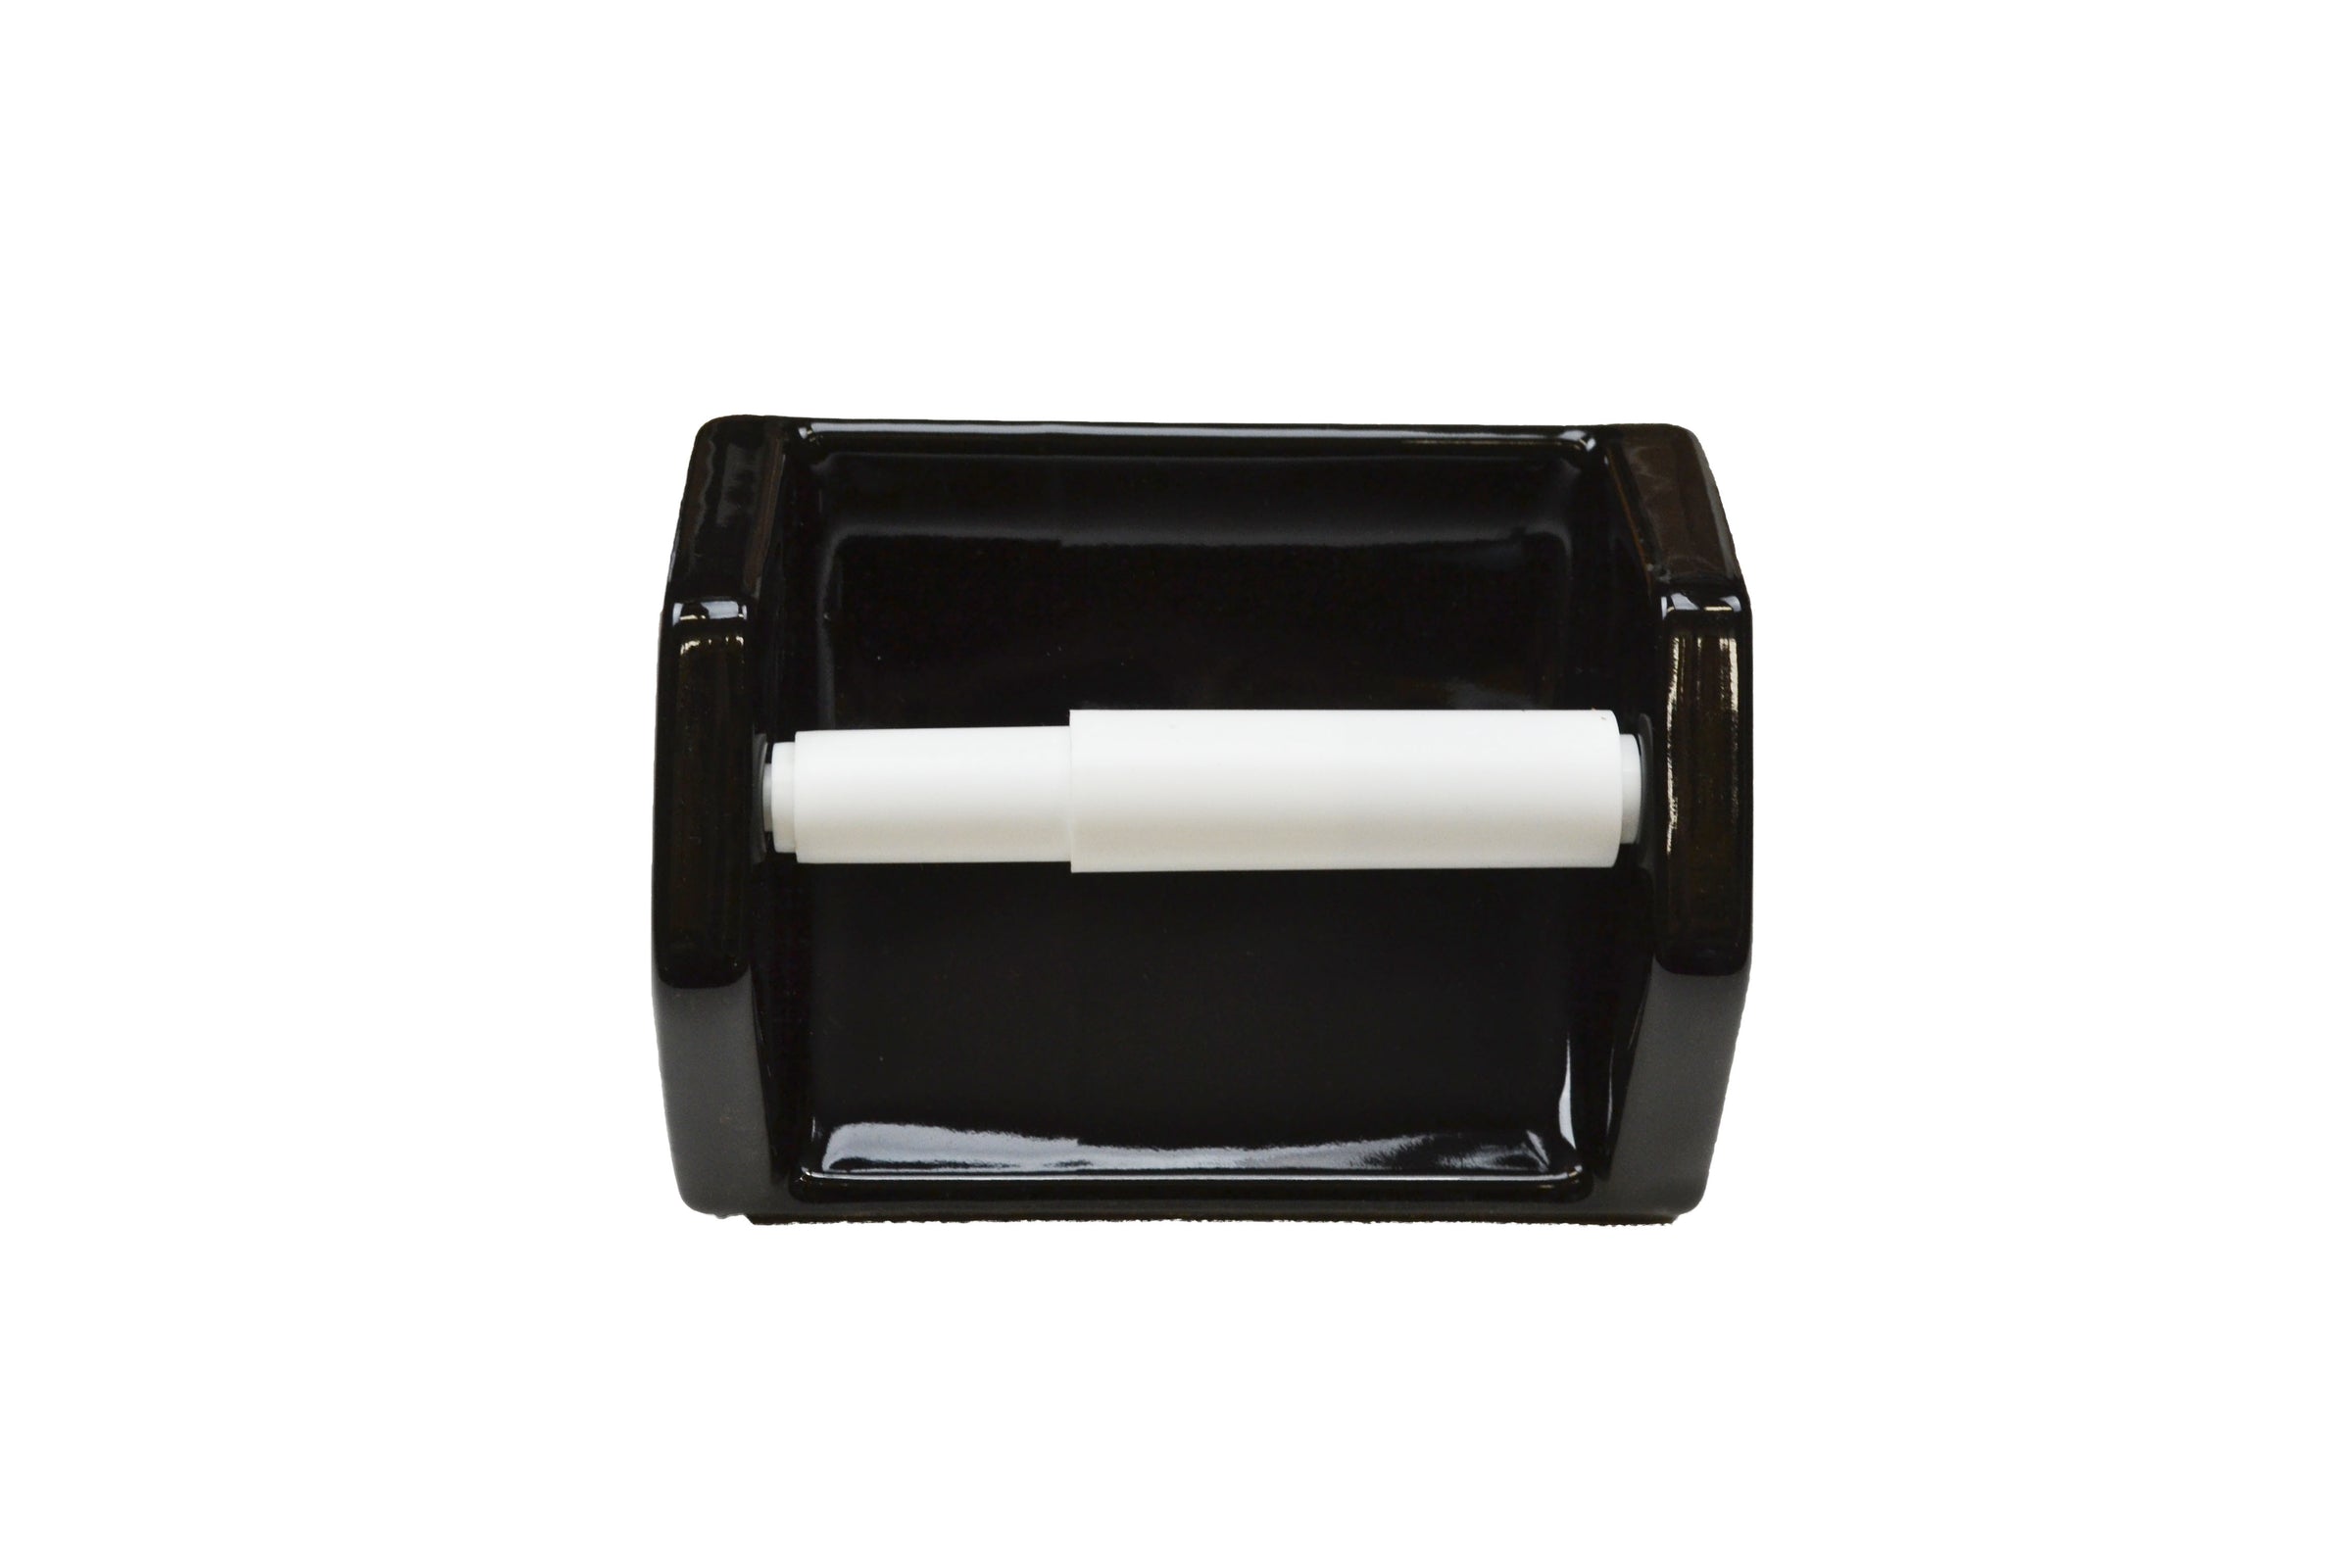 Discover our recessed porcelain roll holder